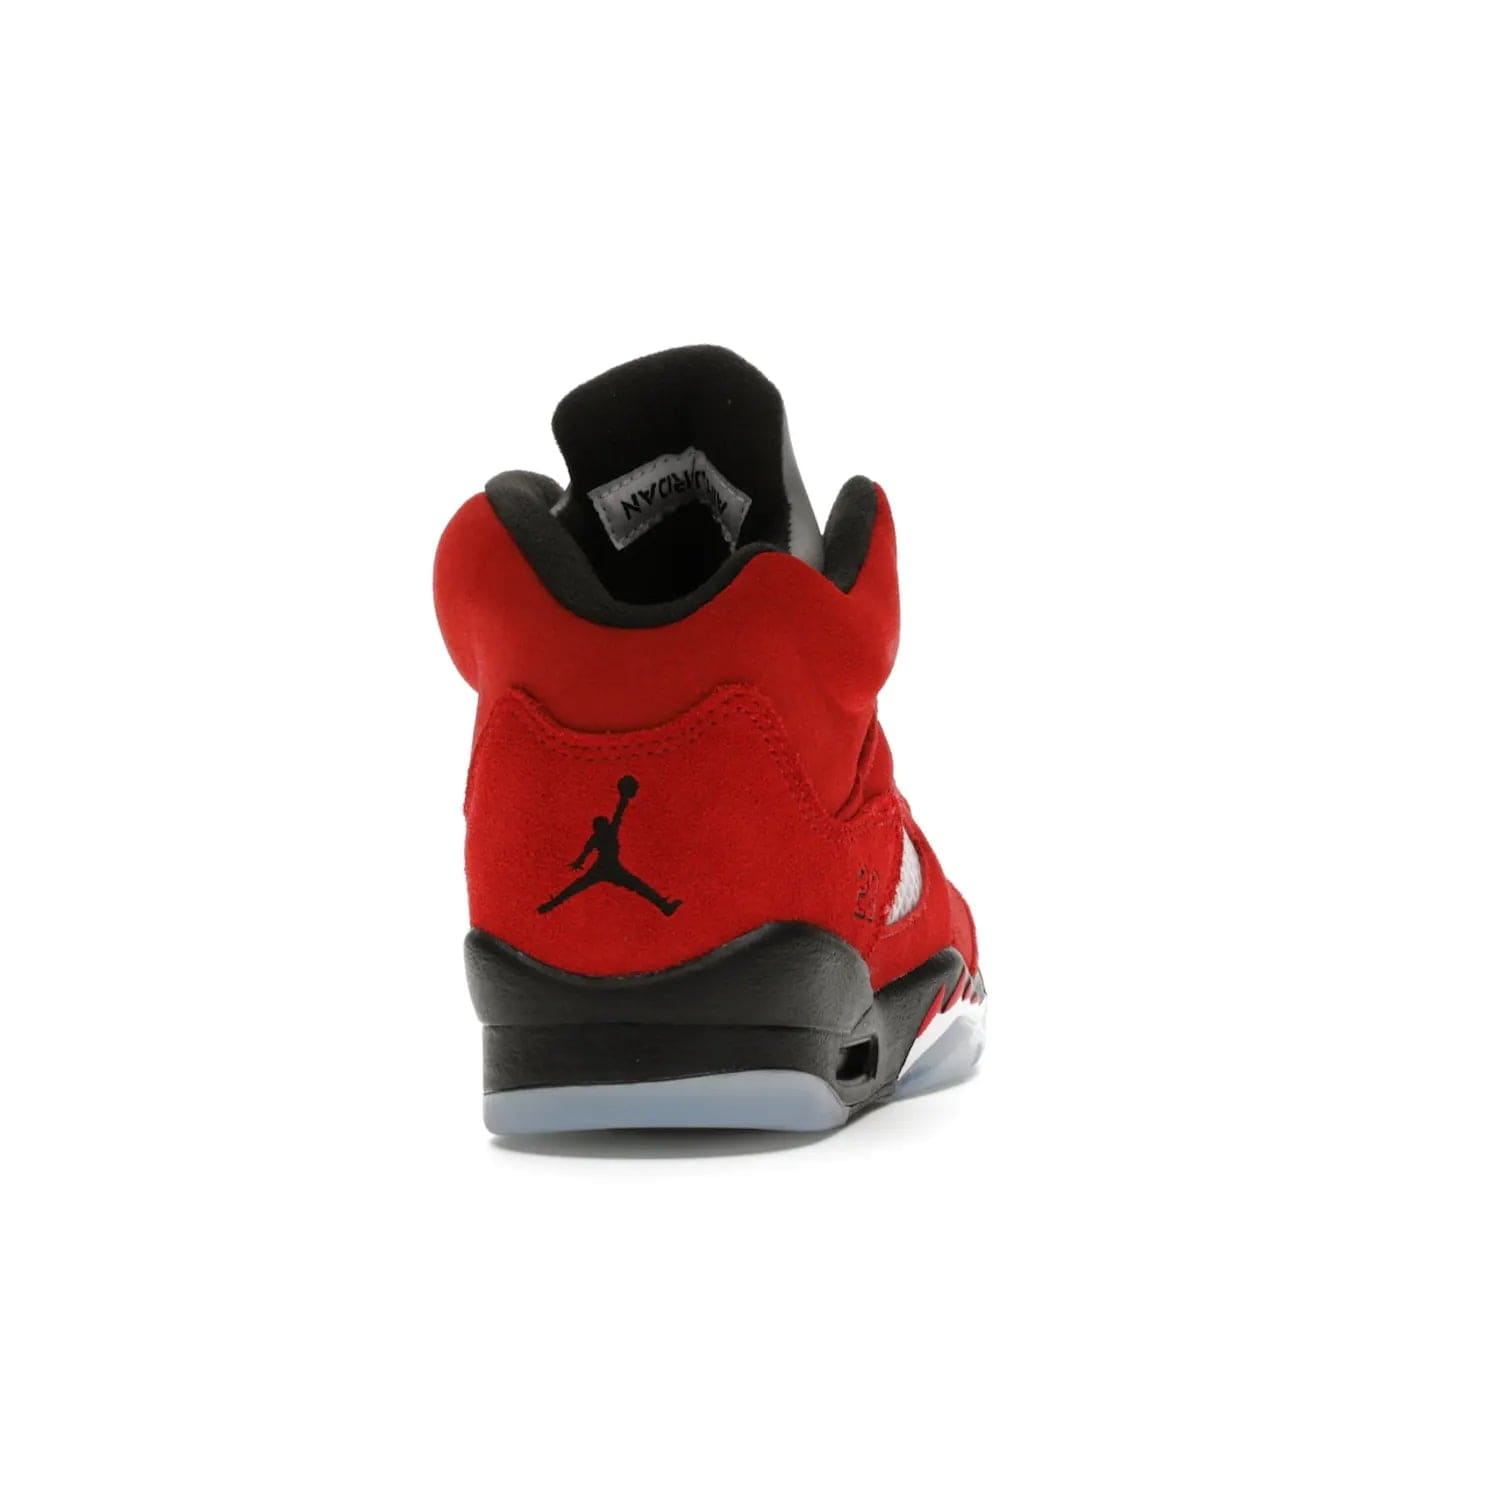 Jordan 5 Retro Raging Bull Red (2021) (GS) - Image 29 - Only at www.BallersClubKickz.com - Jordan 5 Retro Raging Bulls Red 2021 GS. Varsity Red suede upper with embroidered number 23, black leather detail, red laces, and midsole with air cushioning. Jumpman logos on tongue, heel, and outsole. On-trend streetwear and basketball style. Released April 10, 2021.